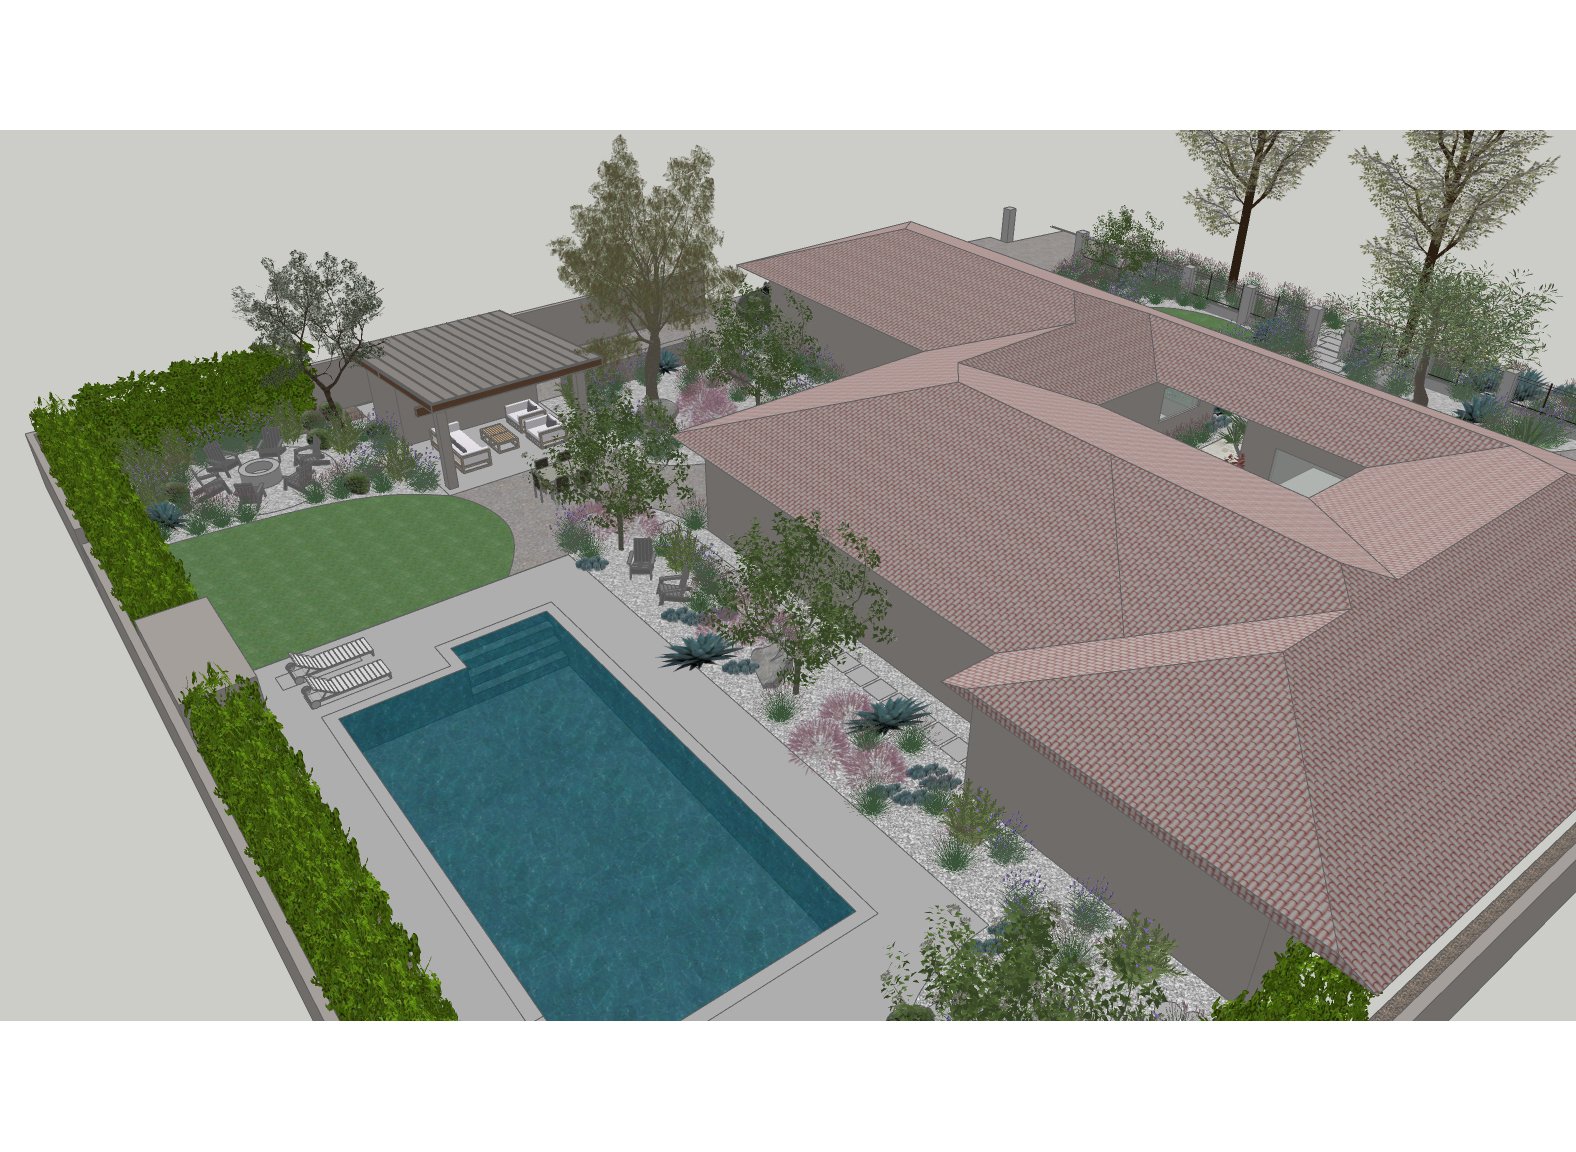  Schematic design for new outdoor pavilion, fire pit, hardscape, and planting throughout 